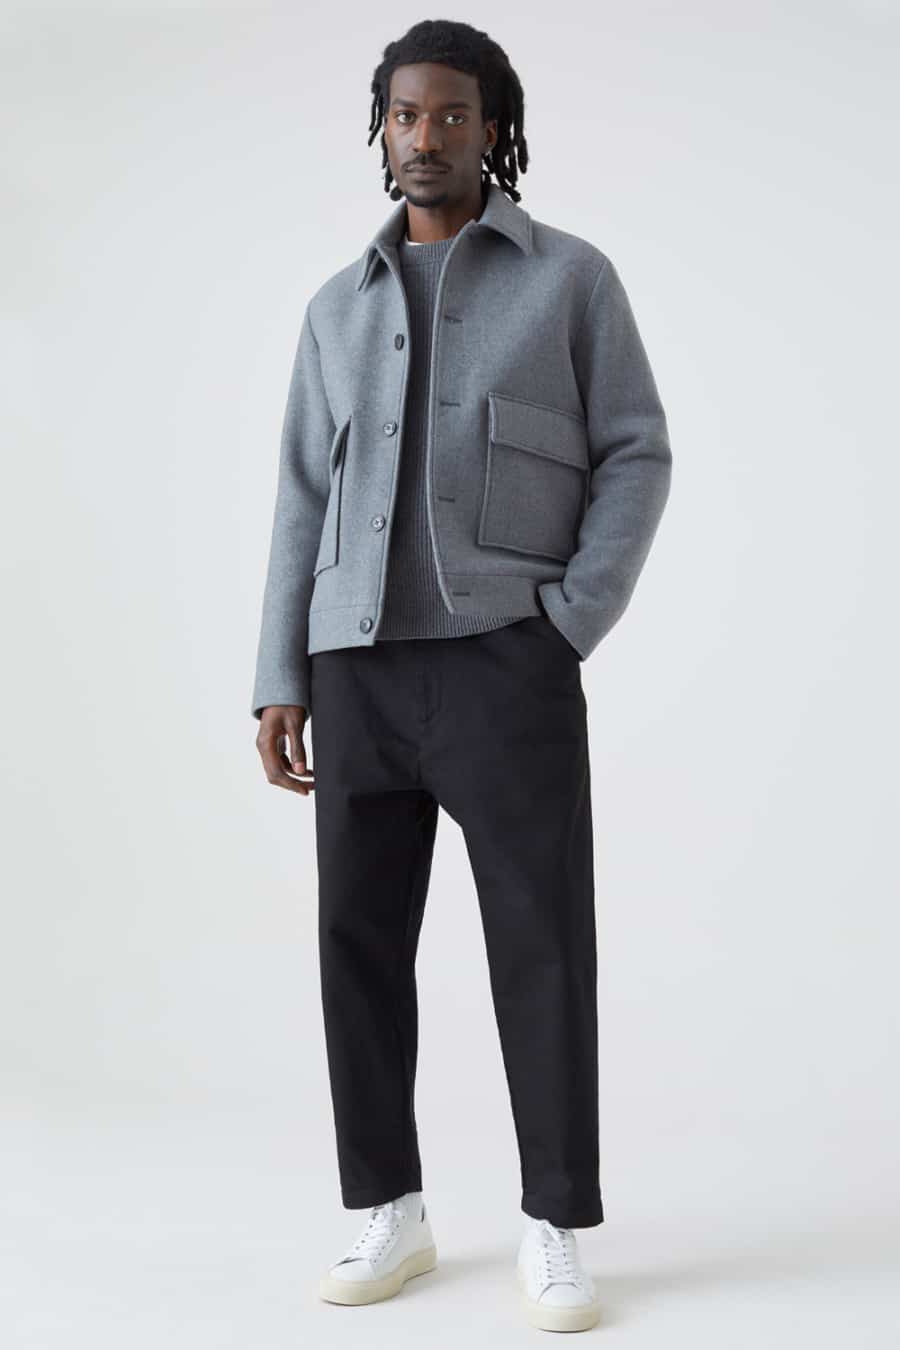 Men's black wide leg chinos, grey ribbed sweater, grey wool blouson jacket and white sneakers outfit